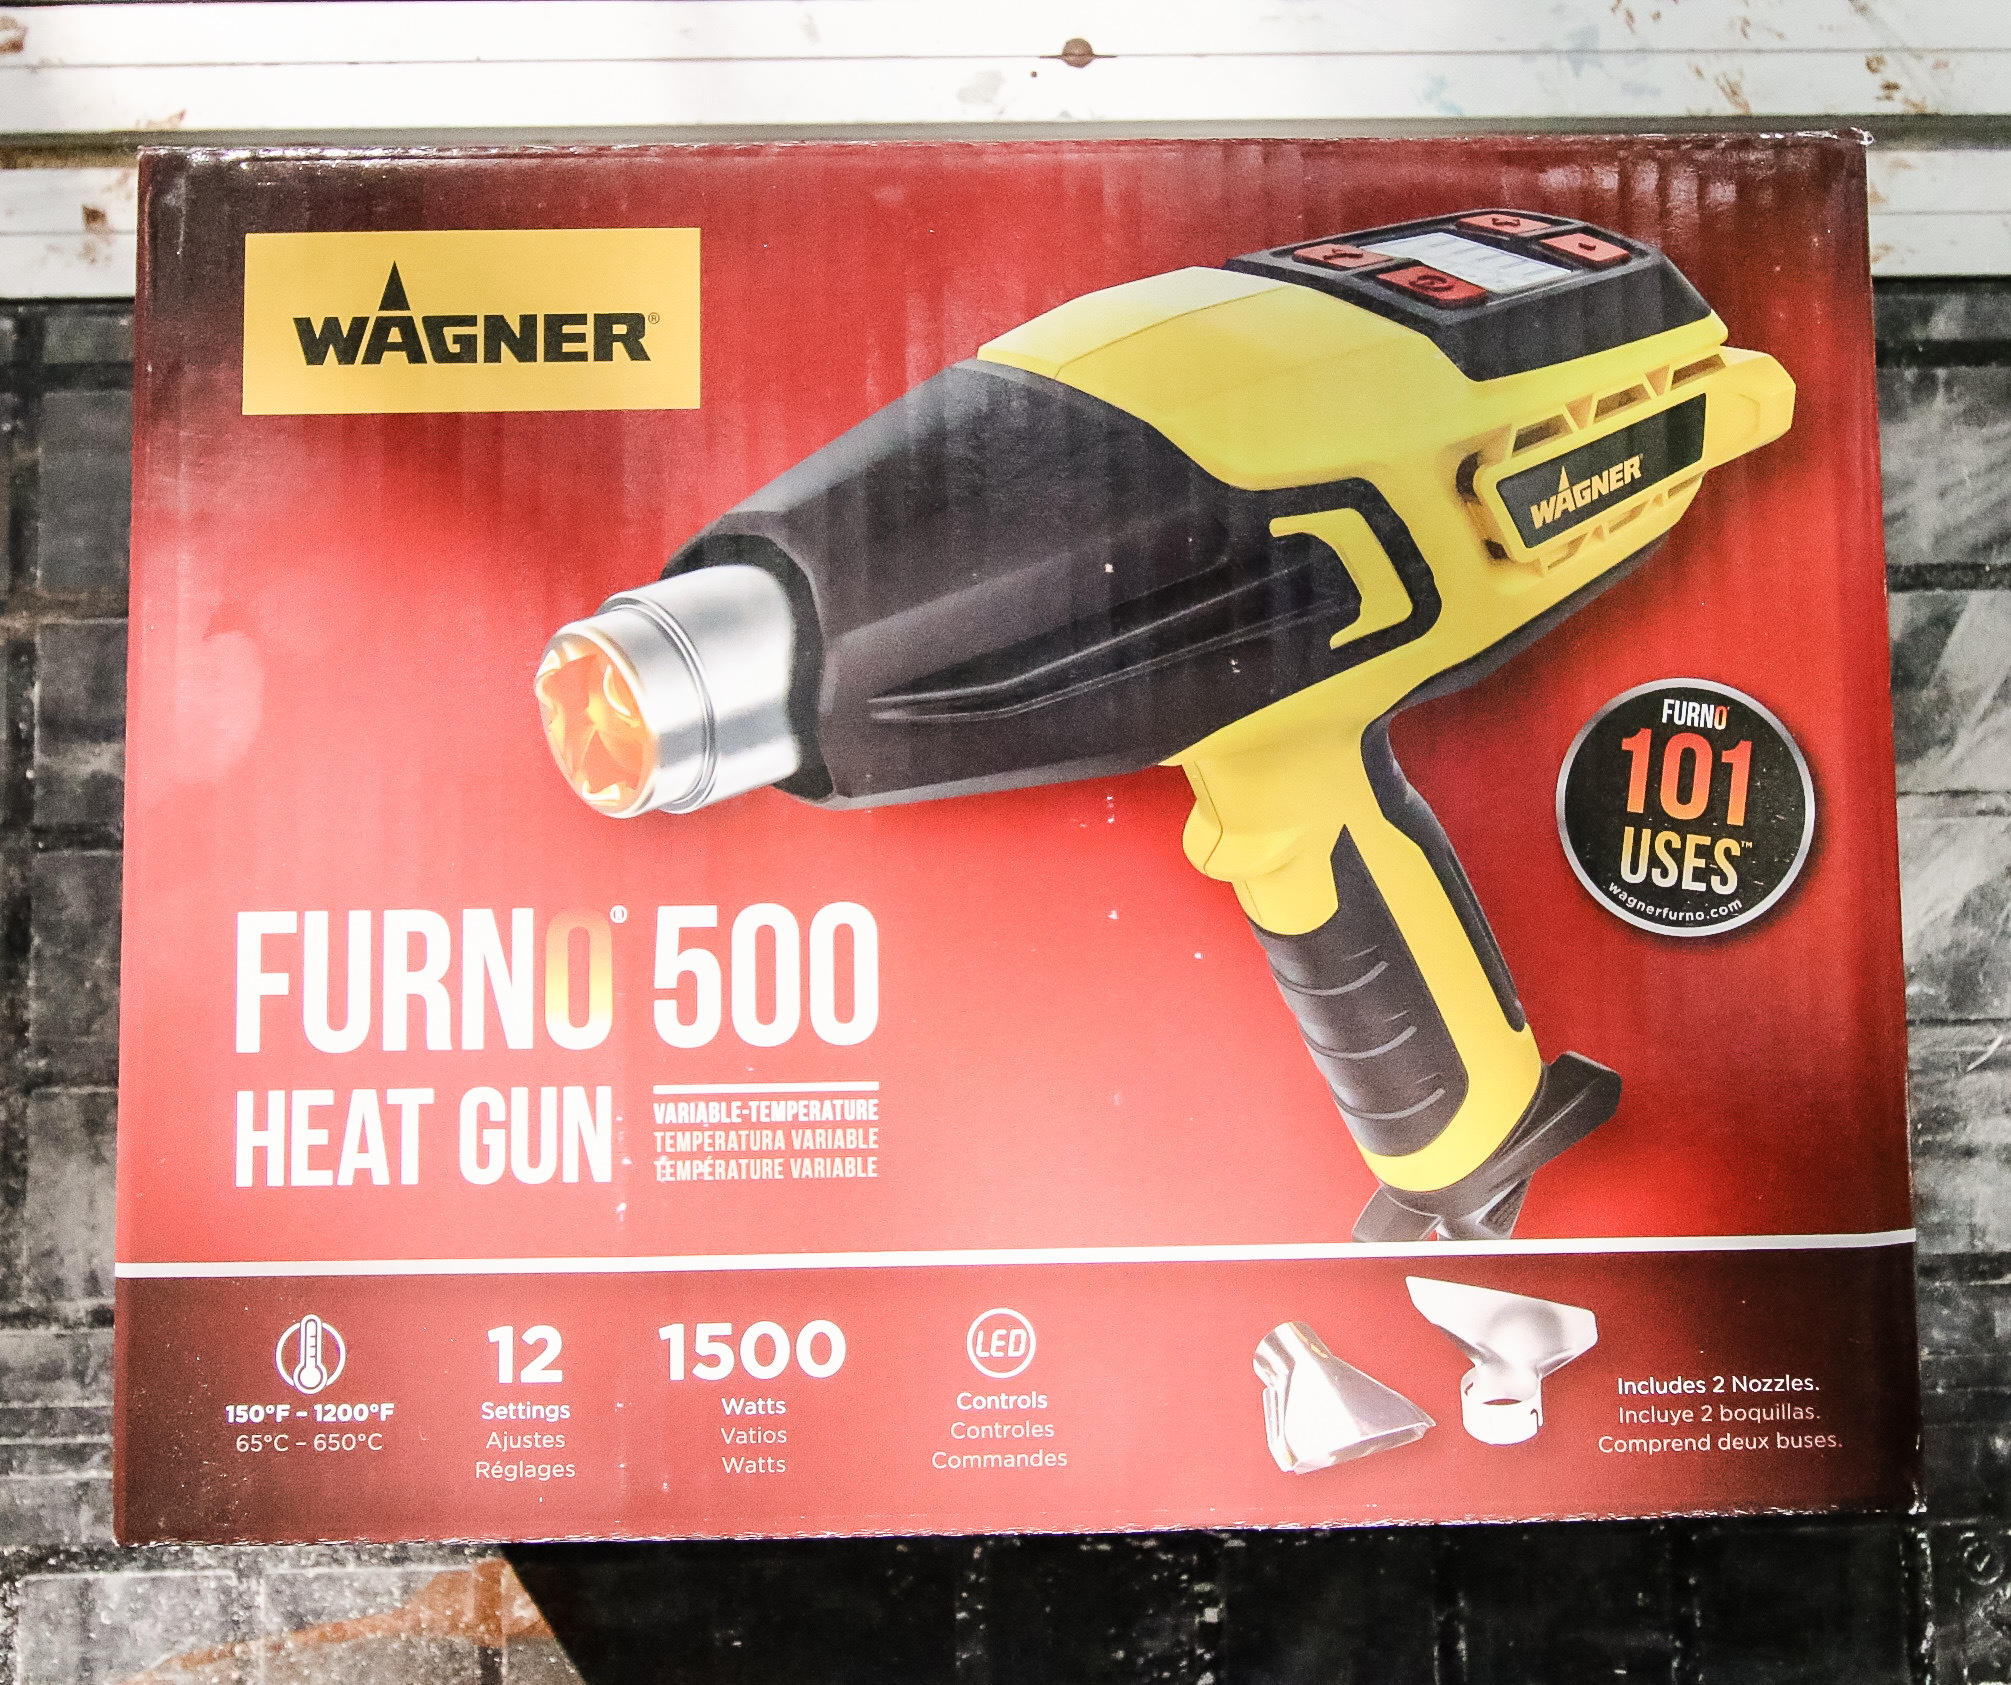 Wagner FURNO 500 Review